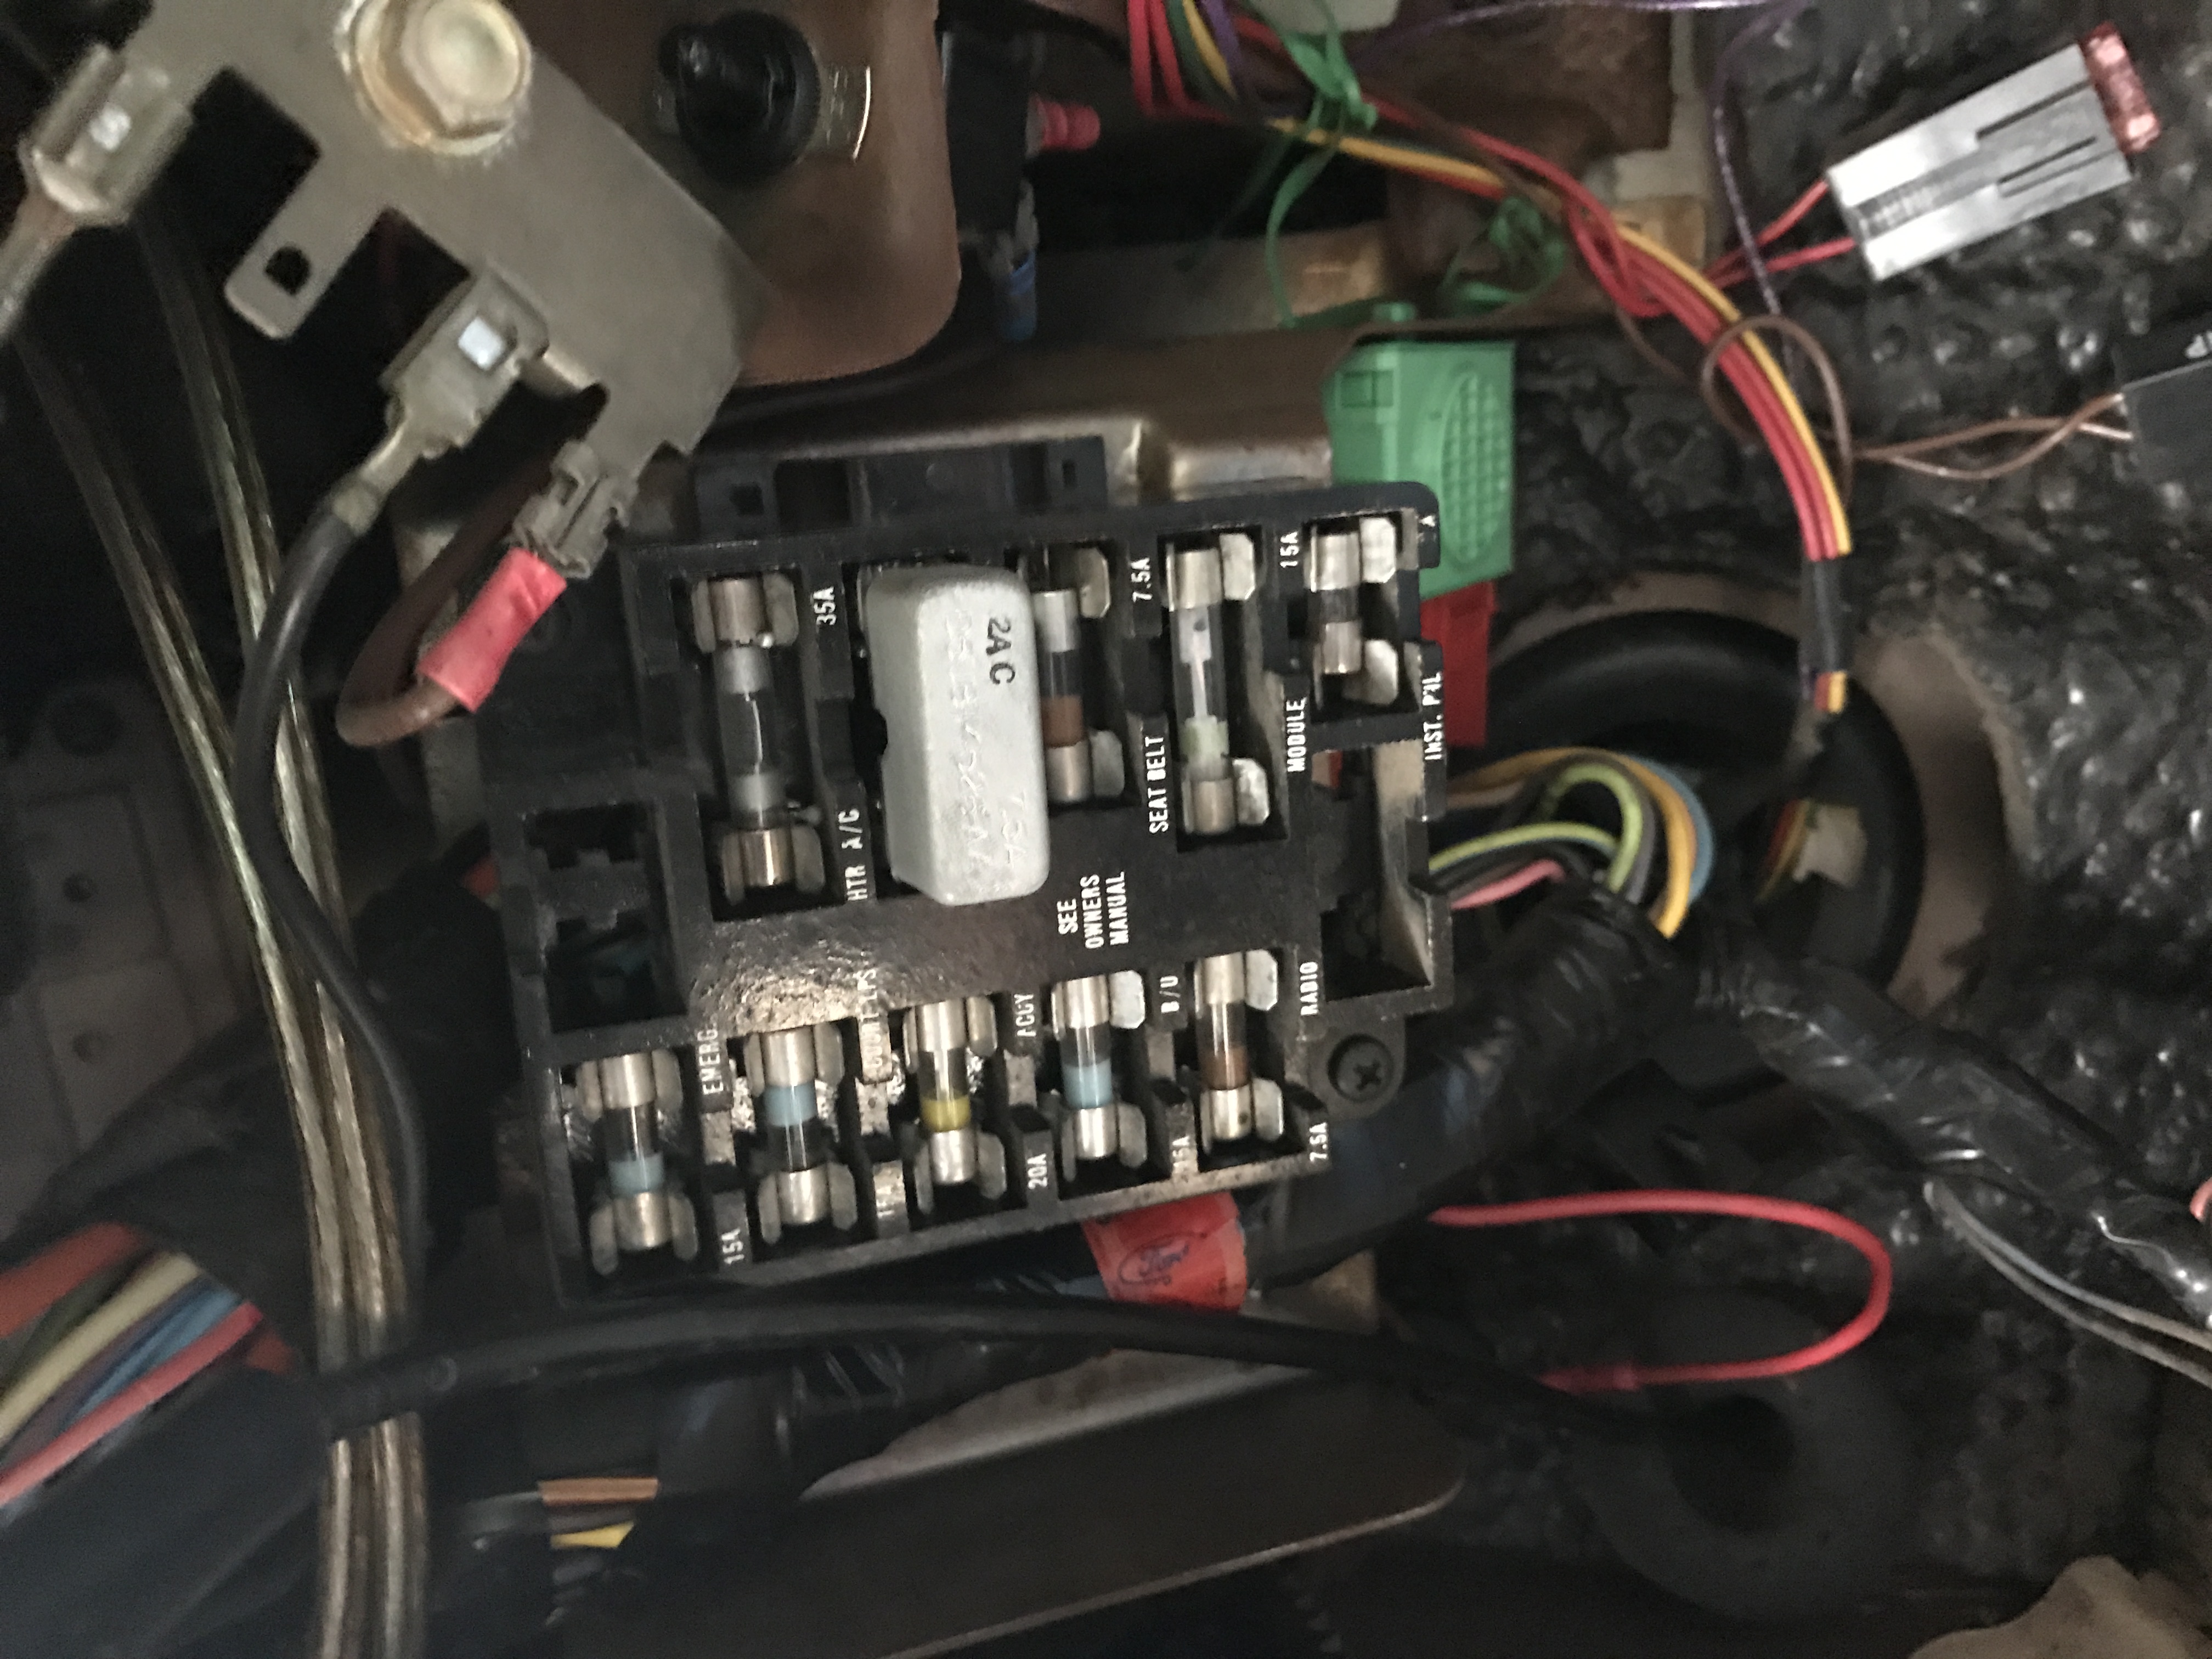 1982 Ford e150 HEI swap wiring question - Ford Truck Enthusiasts Forums